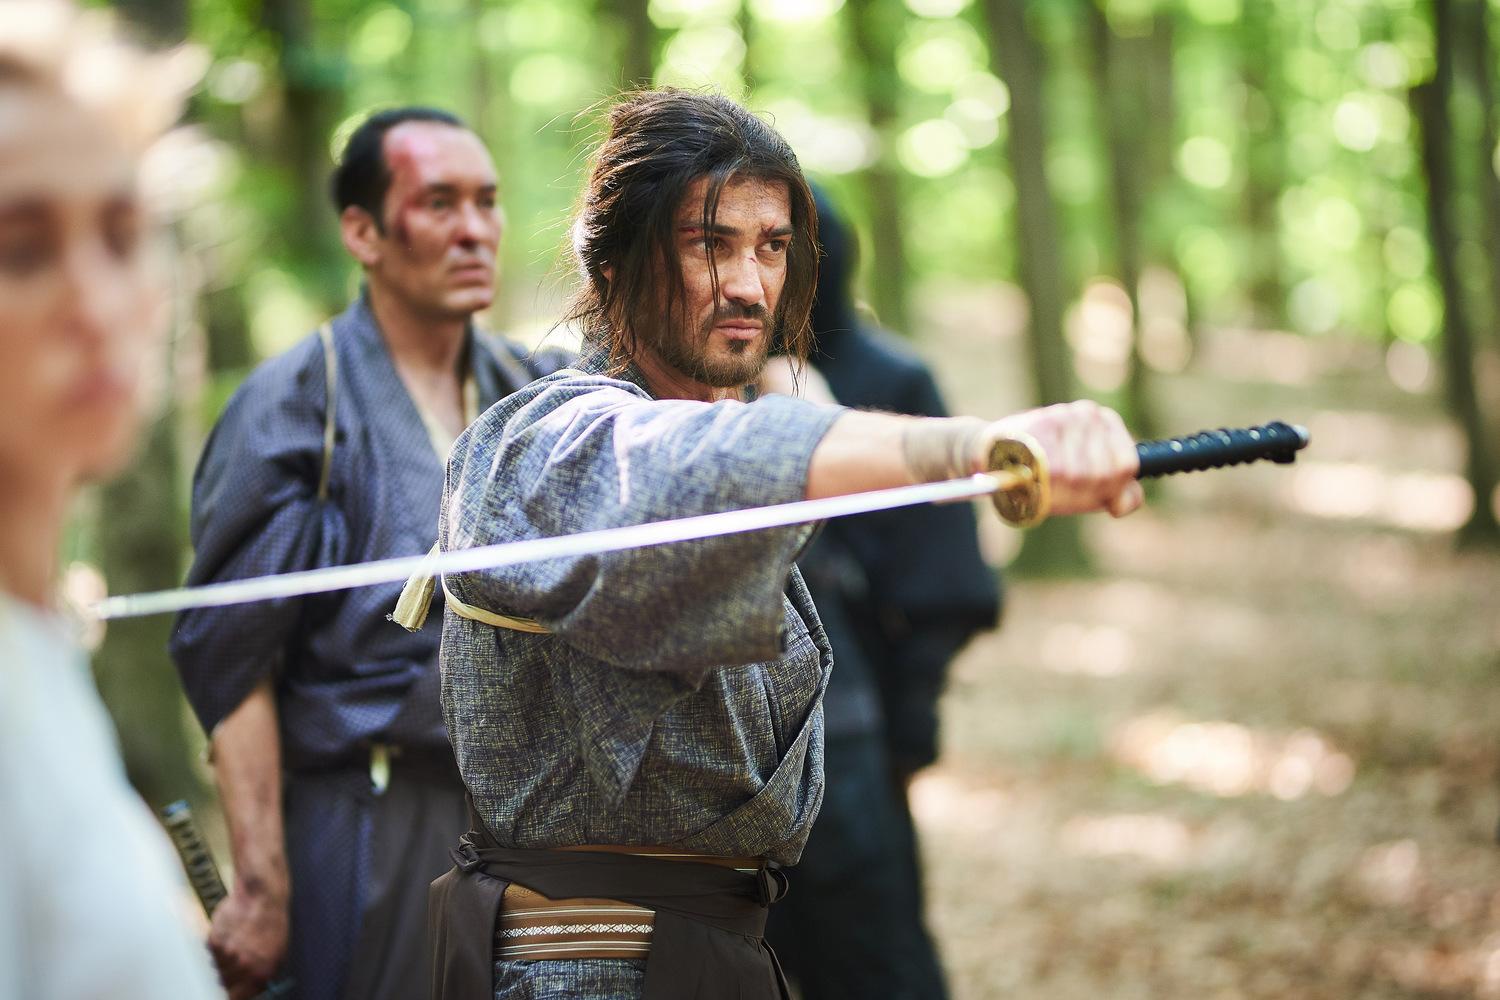 "The Inglorious Serfs" about Taras Shevchenko, who became a samurai, was released online on Talflix